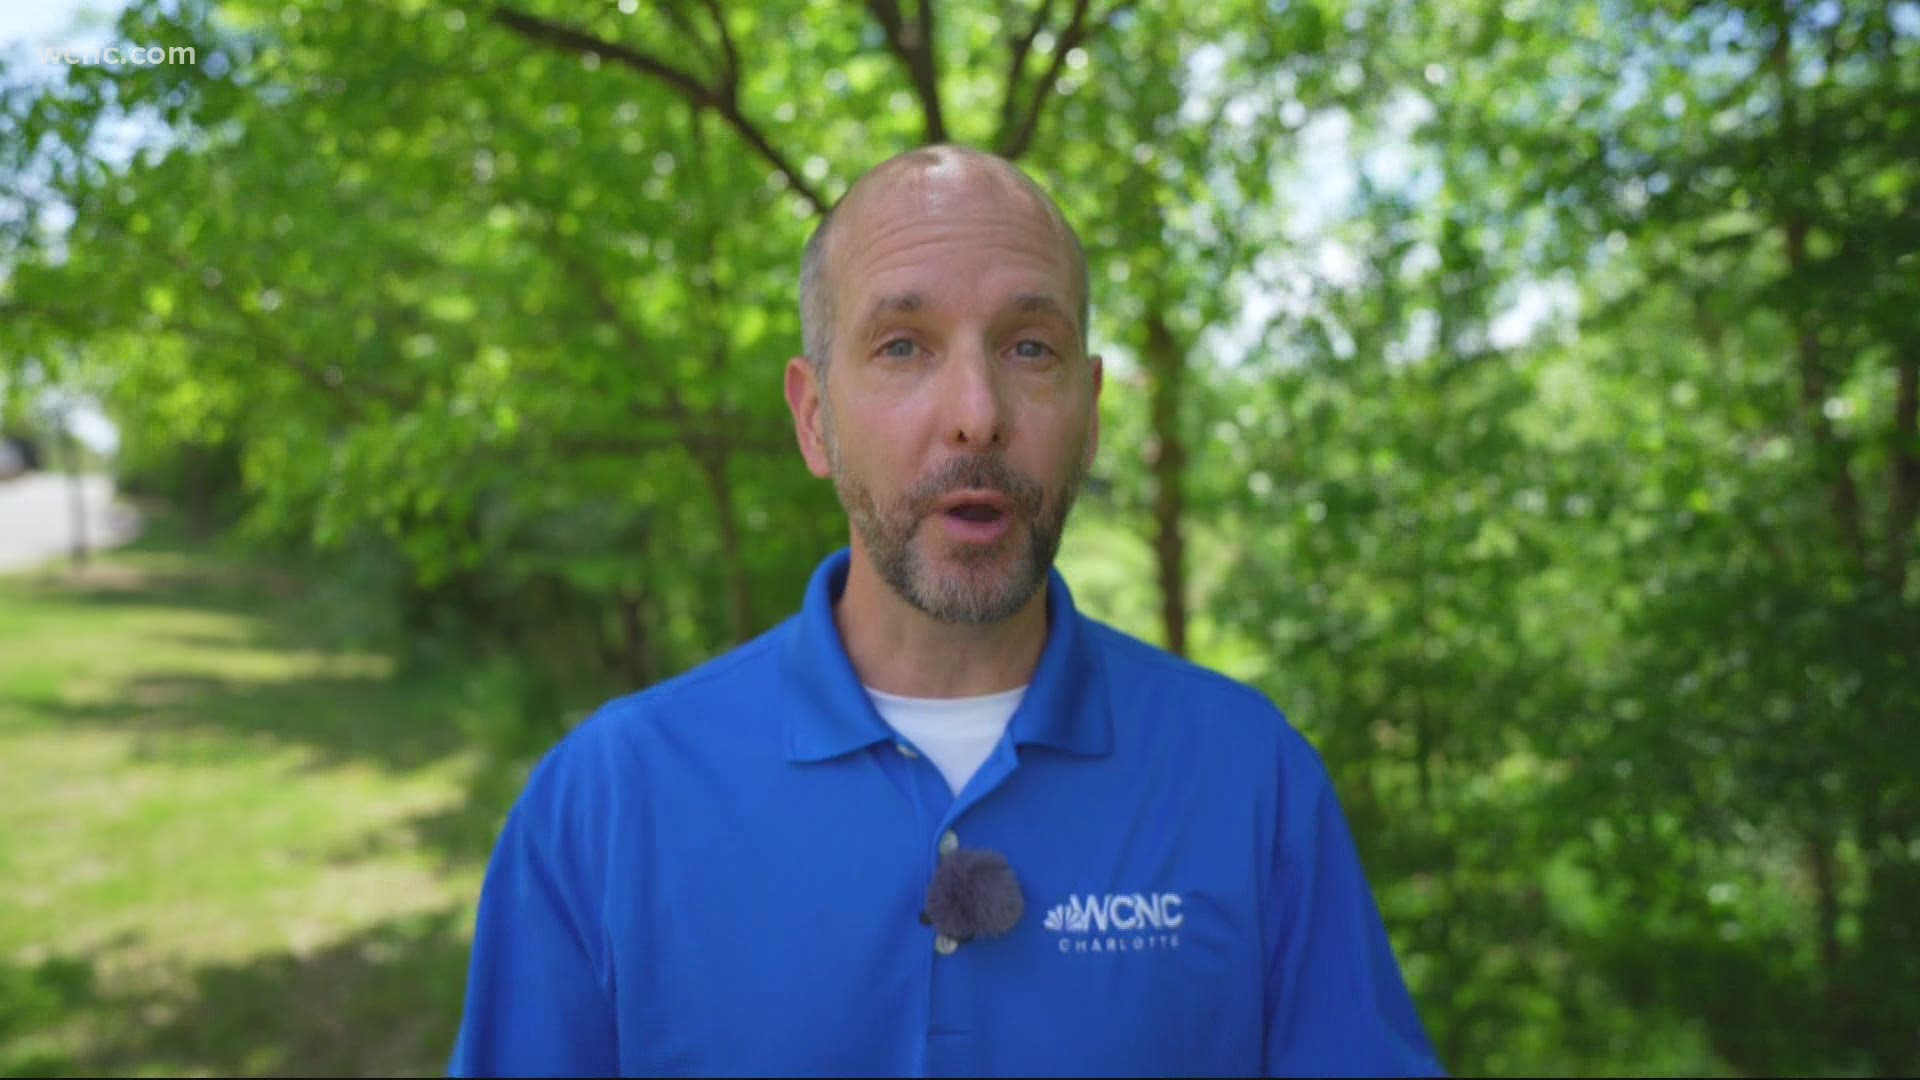 This Earth Day, many people are taking a hard look at how climate change is impacting the planet. Brad Panovich explains how we're feeling it in Charlotte.